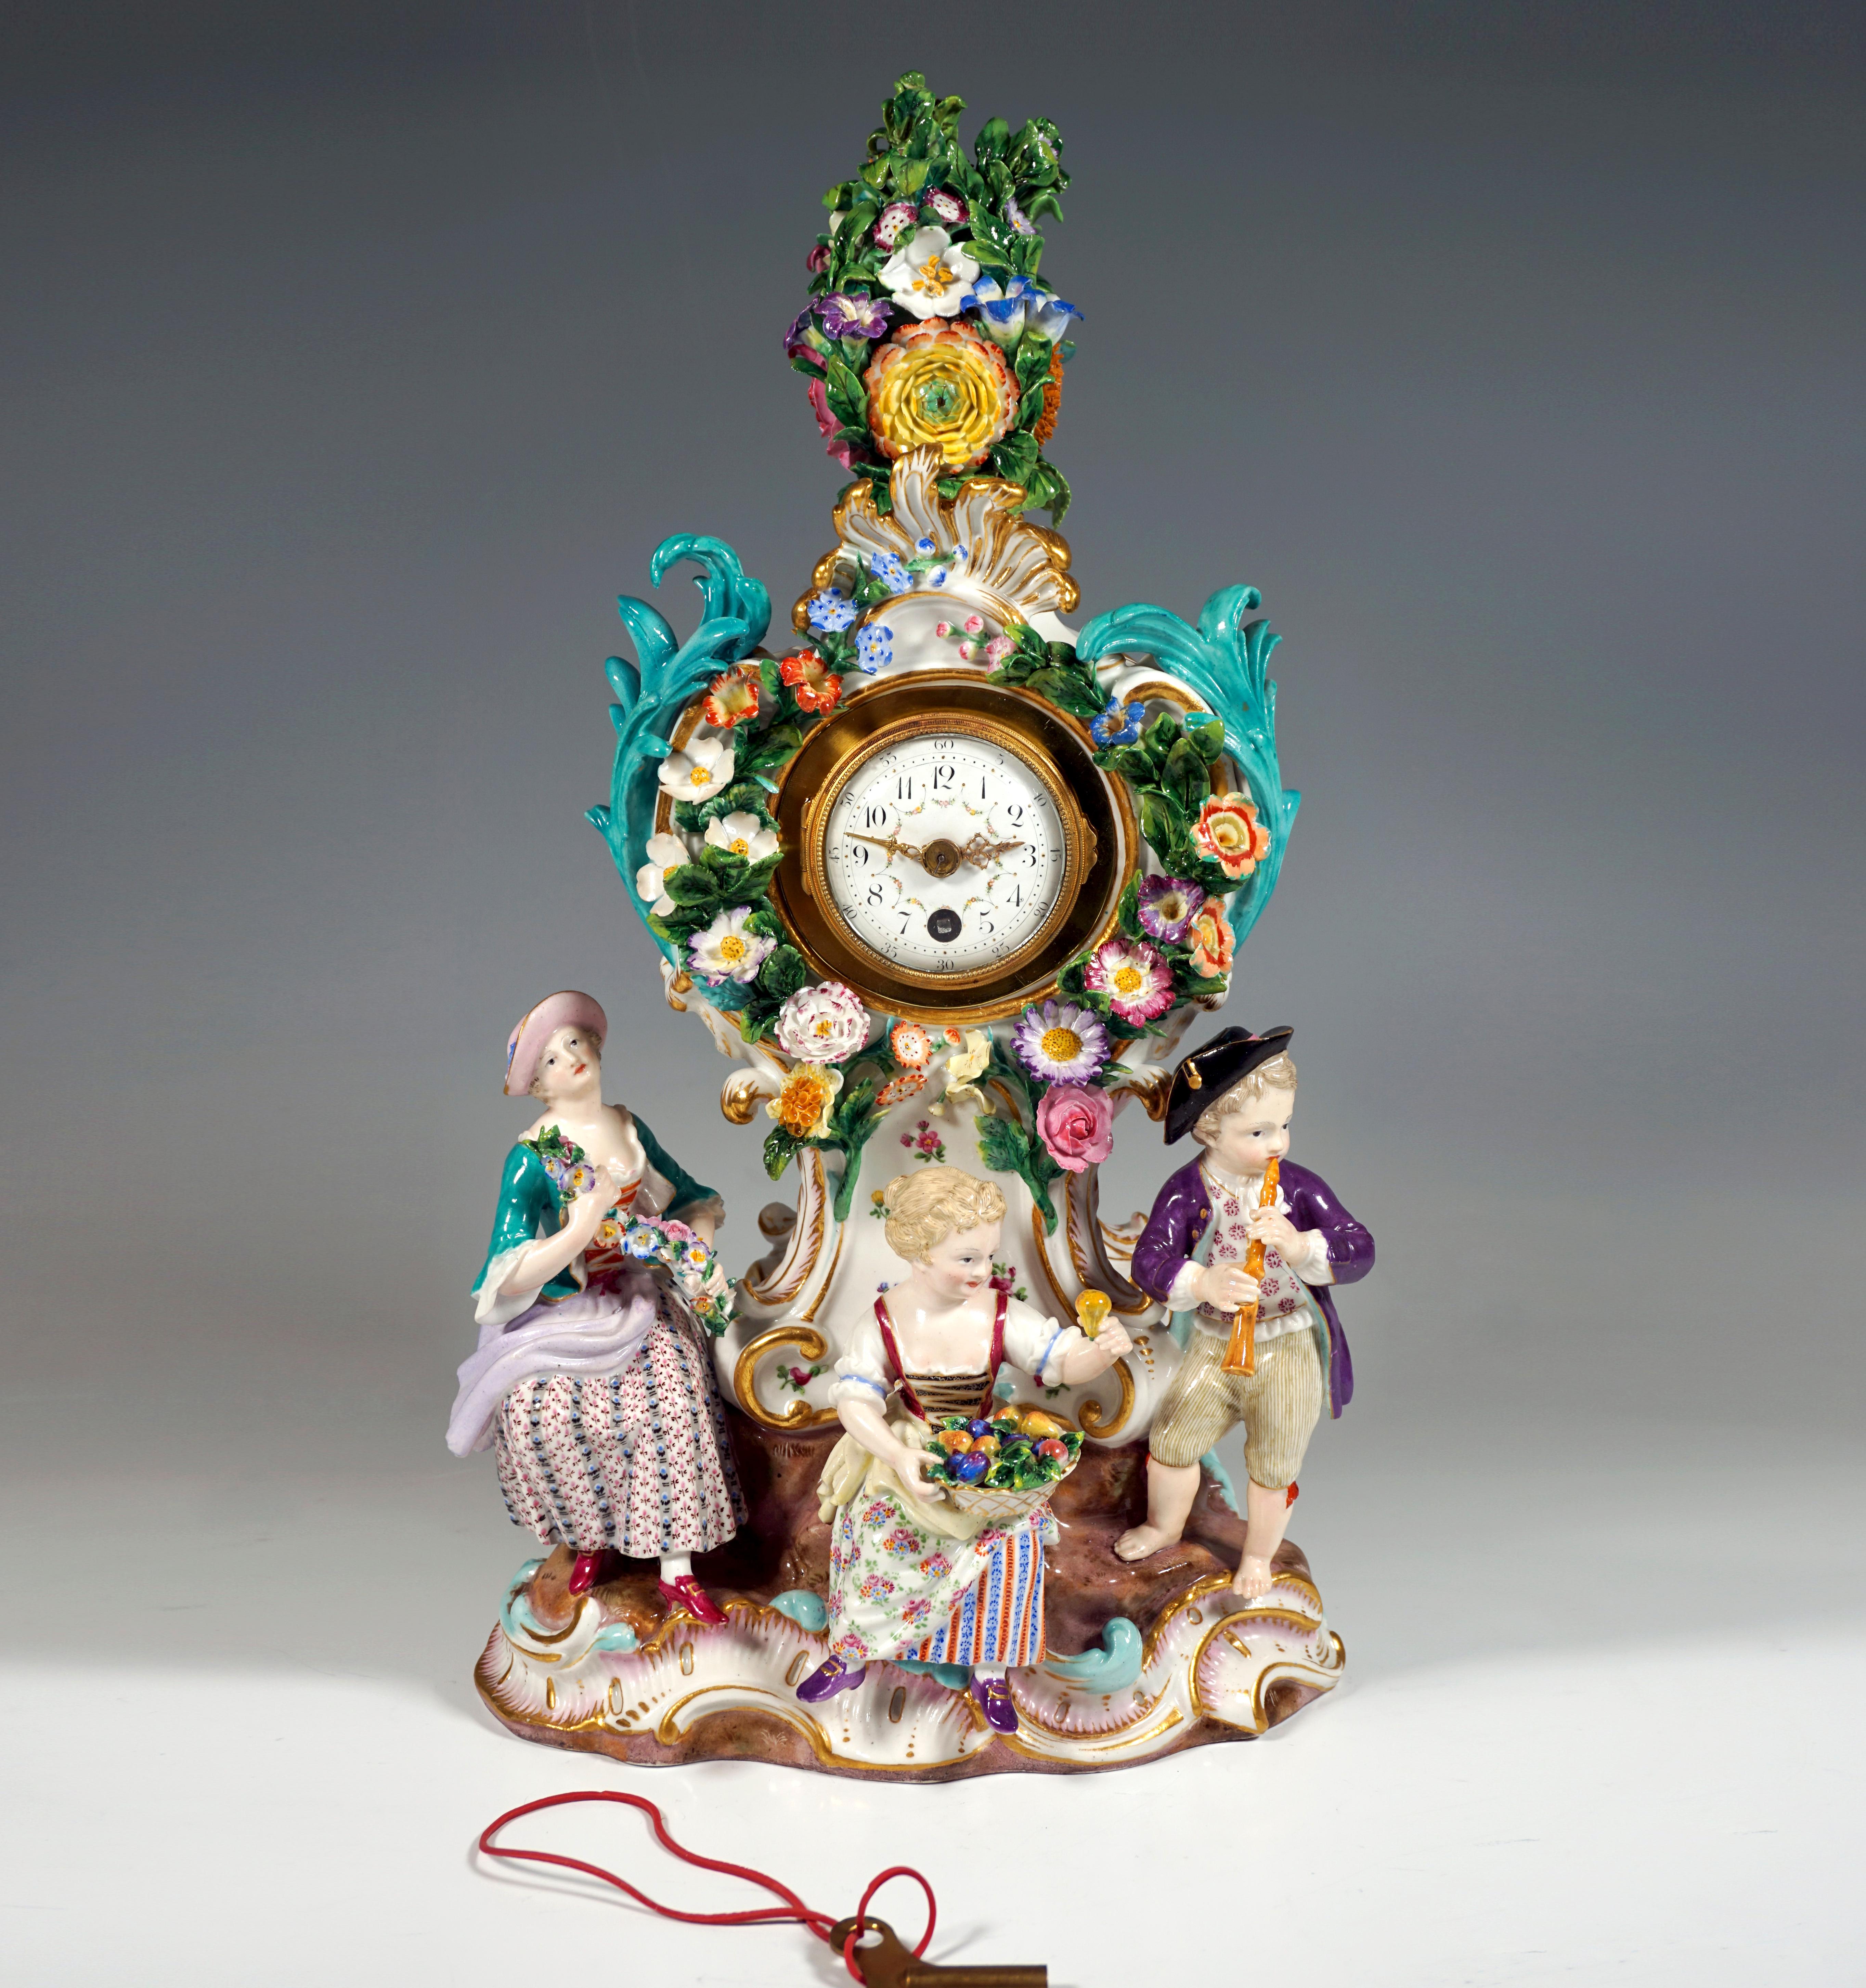 The clock was designed by Leuteritz in the Rococo style using old moulds: 
The clock case rises on a rock base with gold-heightened rocailles, richly decorated with delicate, plastically formed flowers, leaves and rocailles playing around the dial.